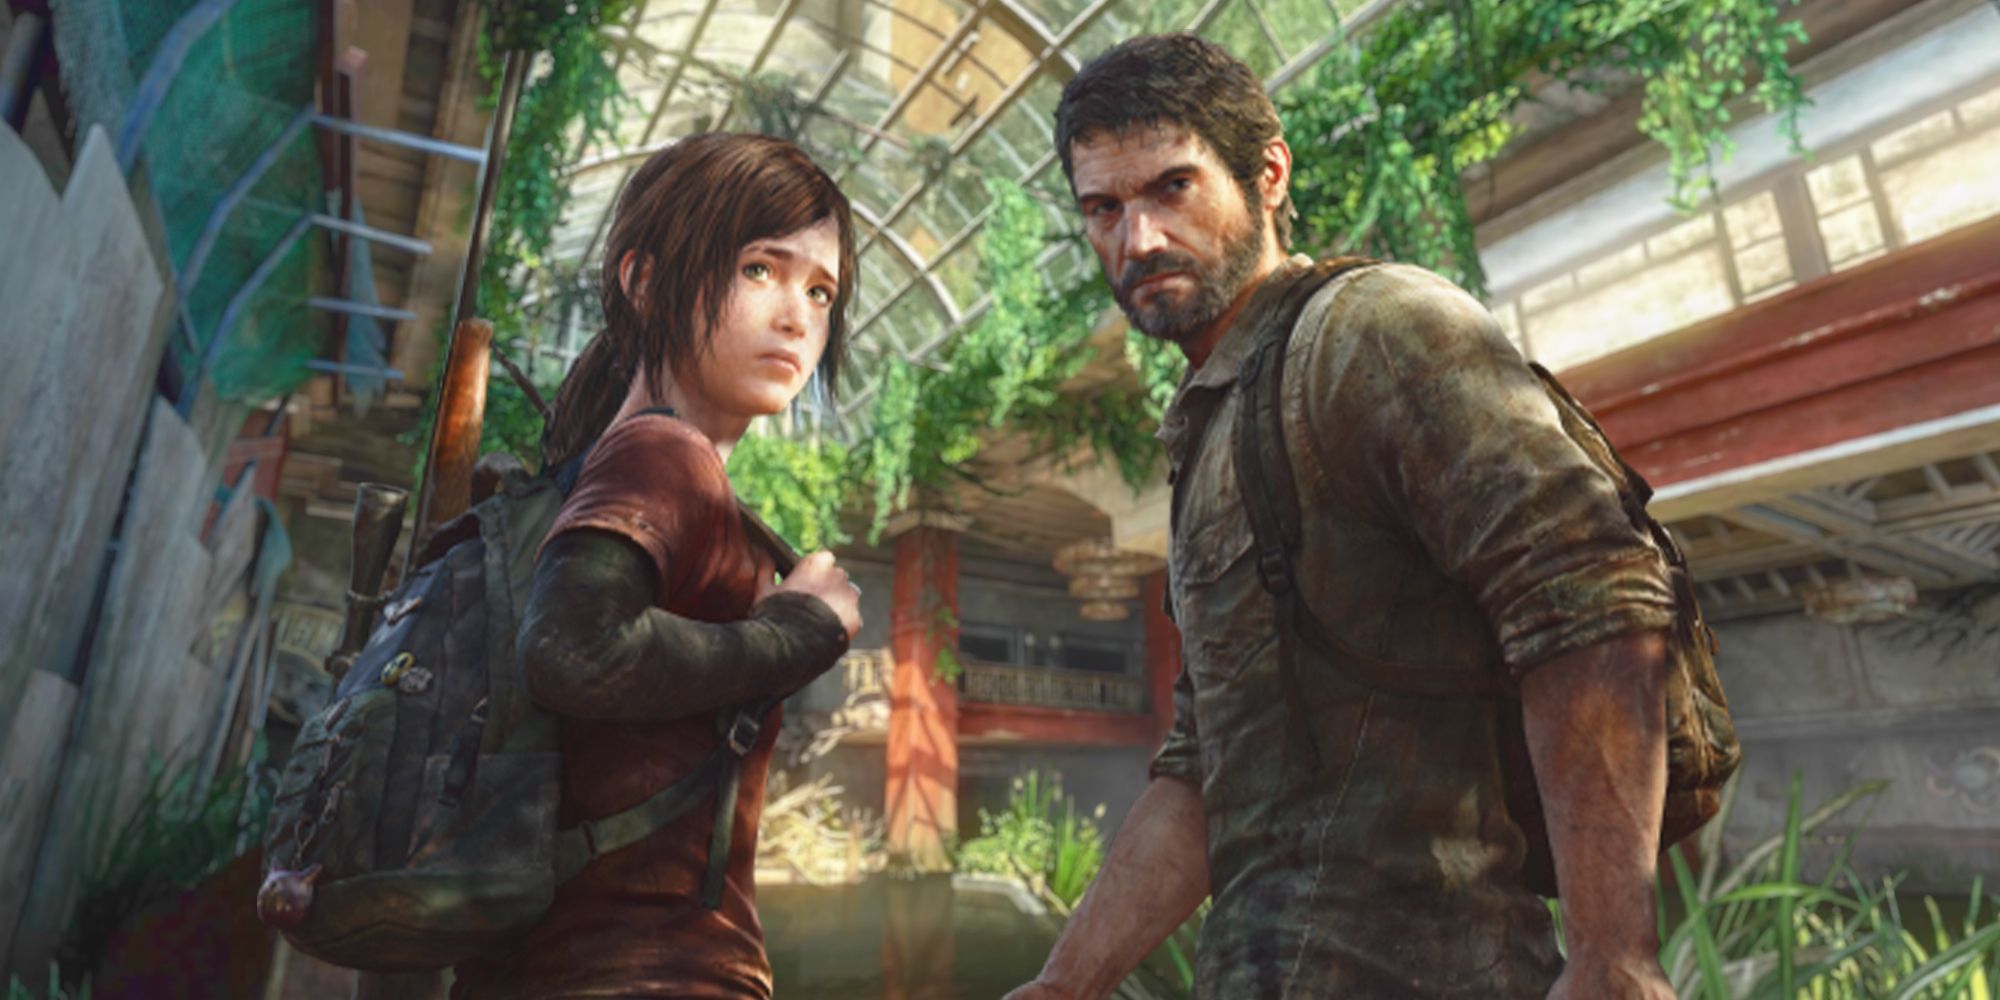 The Last of Us Joel and Ellie with the Hotel level in the background